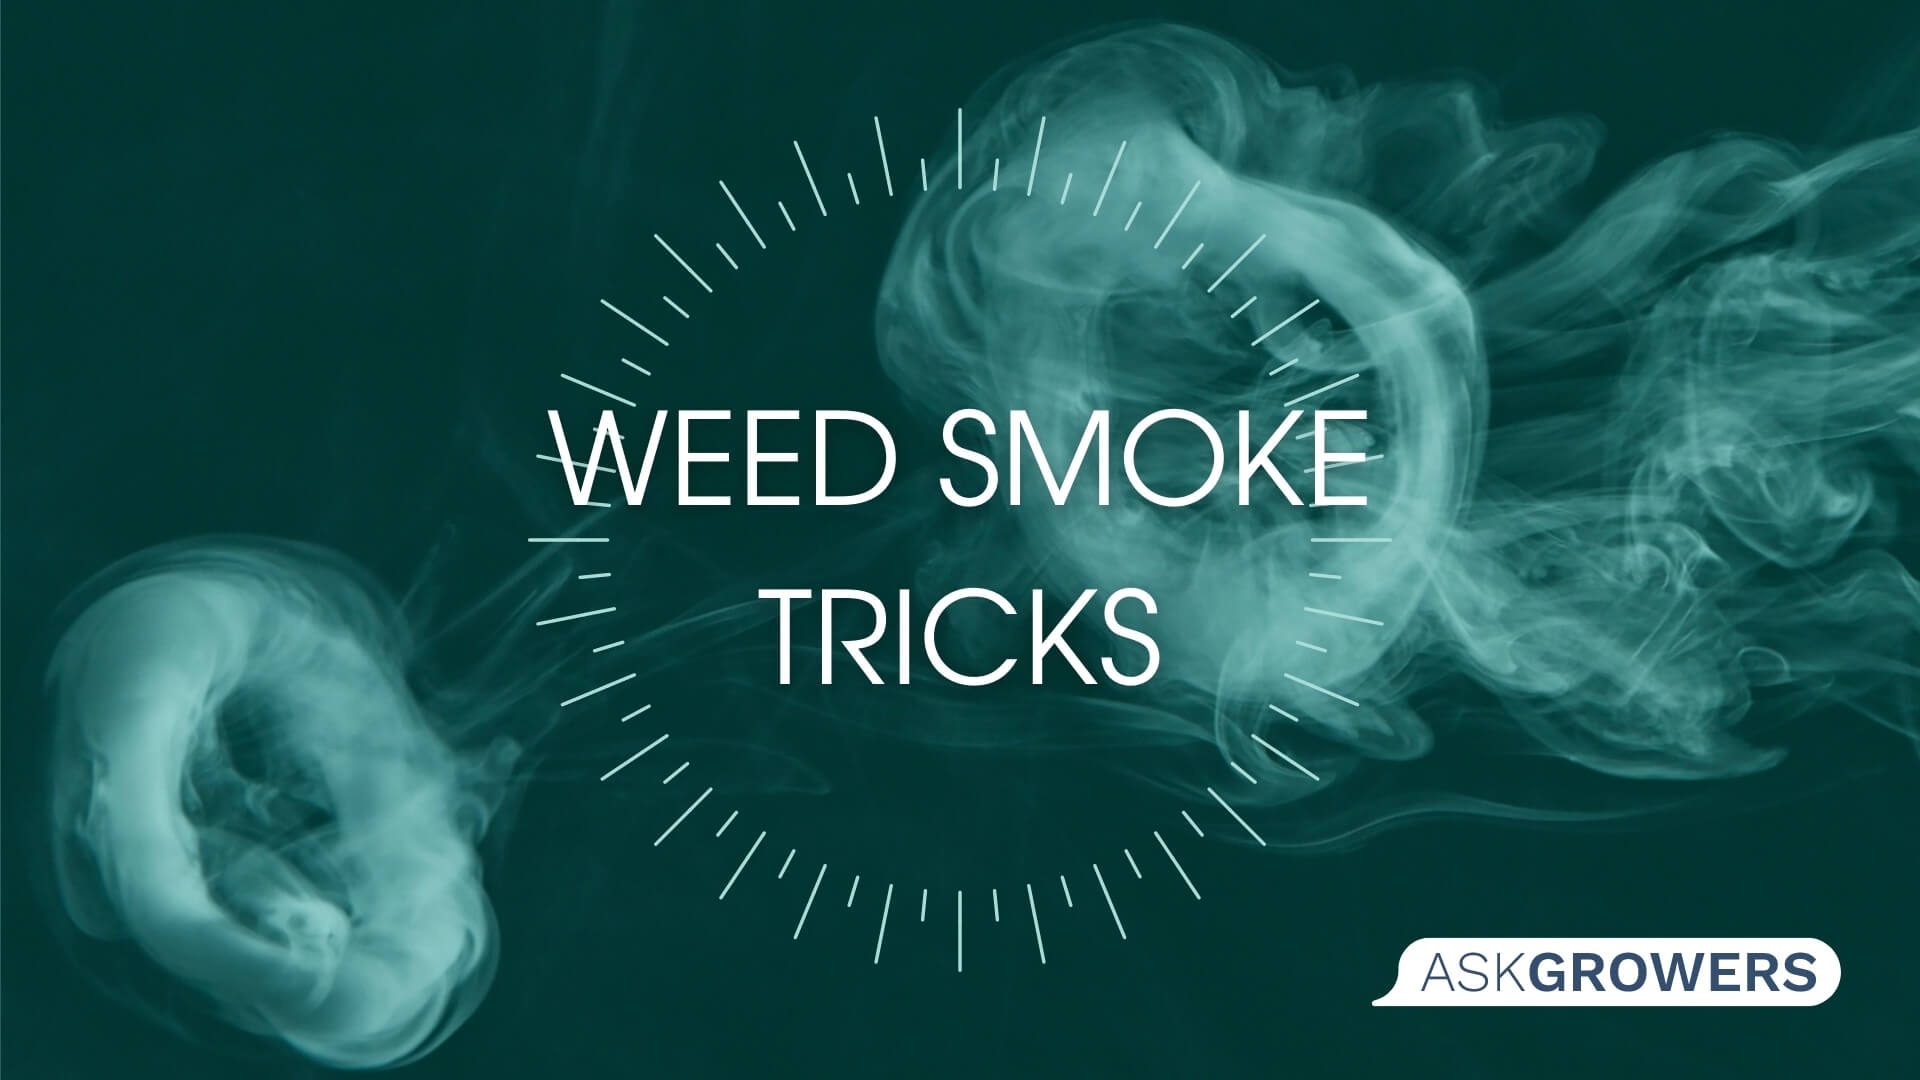 12 Best Weed Smoke Tricks and Tips to Try